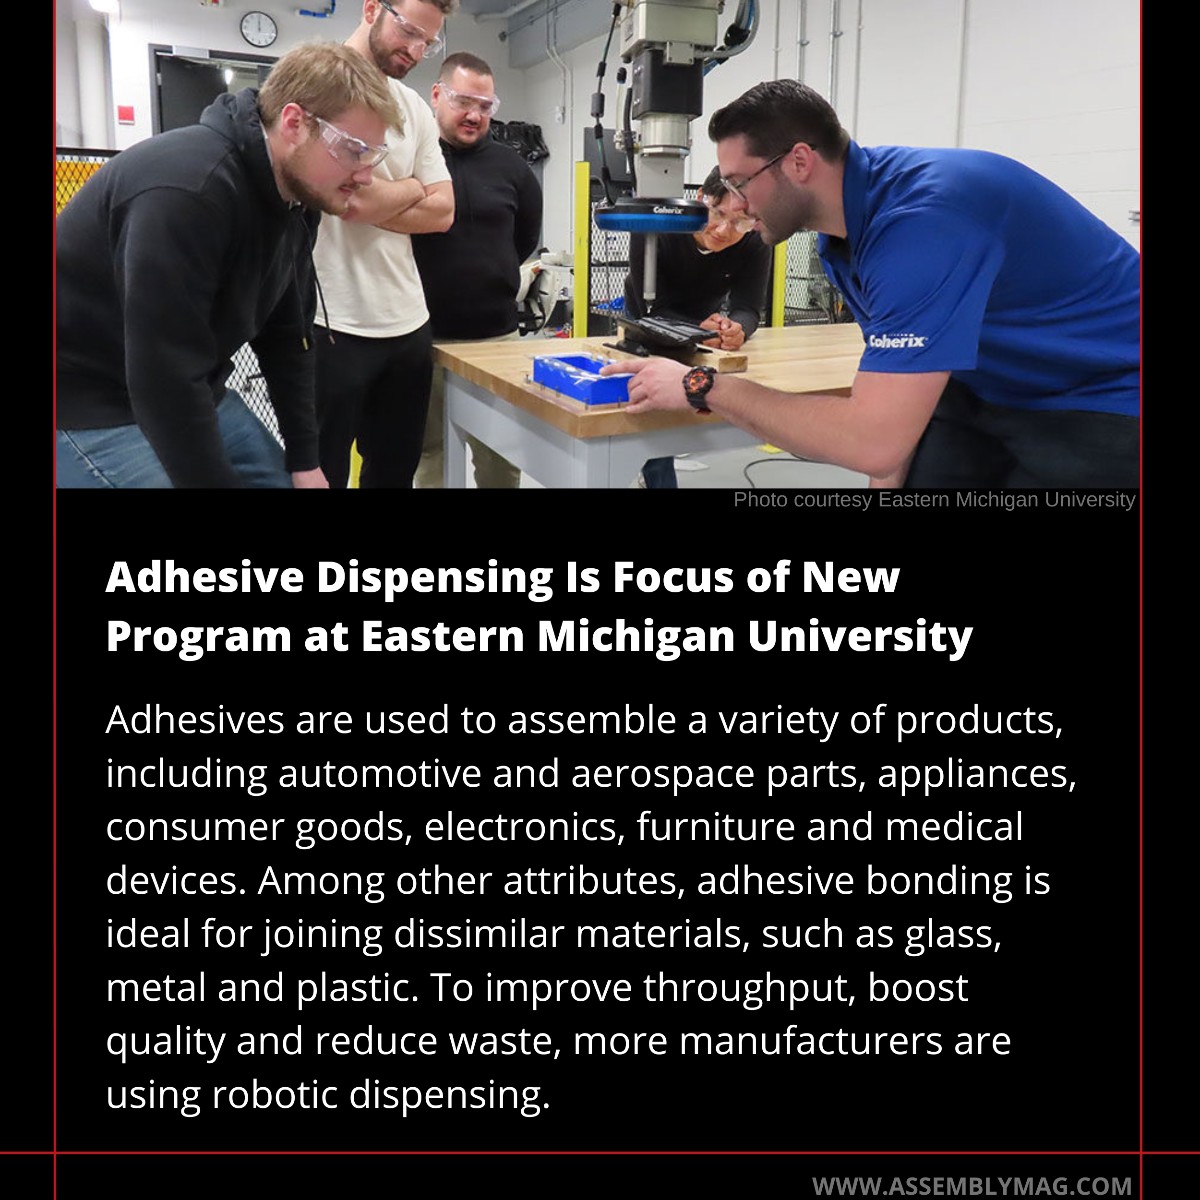 It's hard to believe May is halfway over! Let's take a look at a handful of top articles so far this month. Visit assemblymag.com to read more. #electrification #factories #microfactories #robots #robotics #adhesives #automation #assembly #assemblyplant